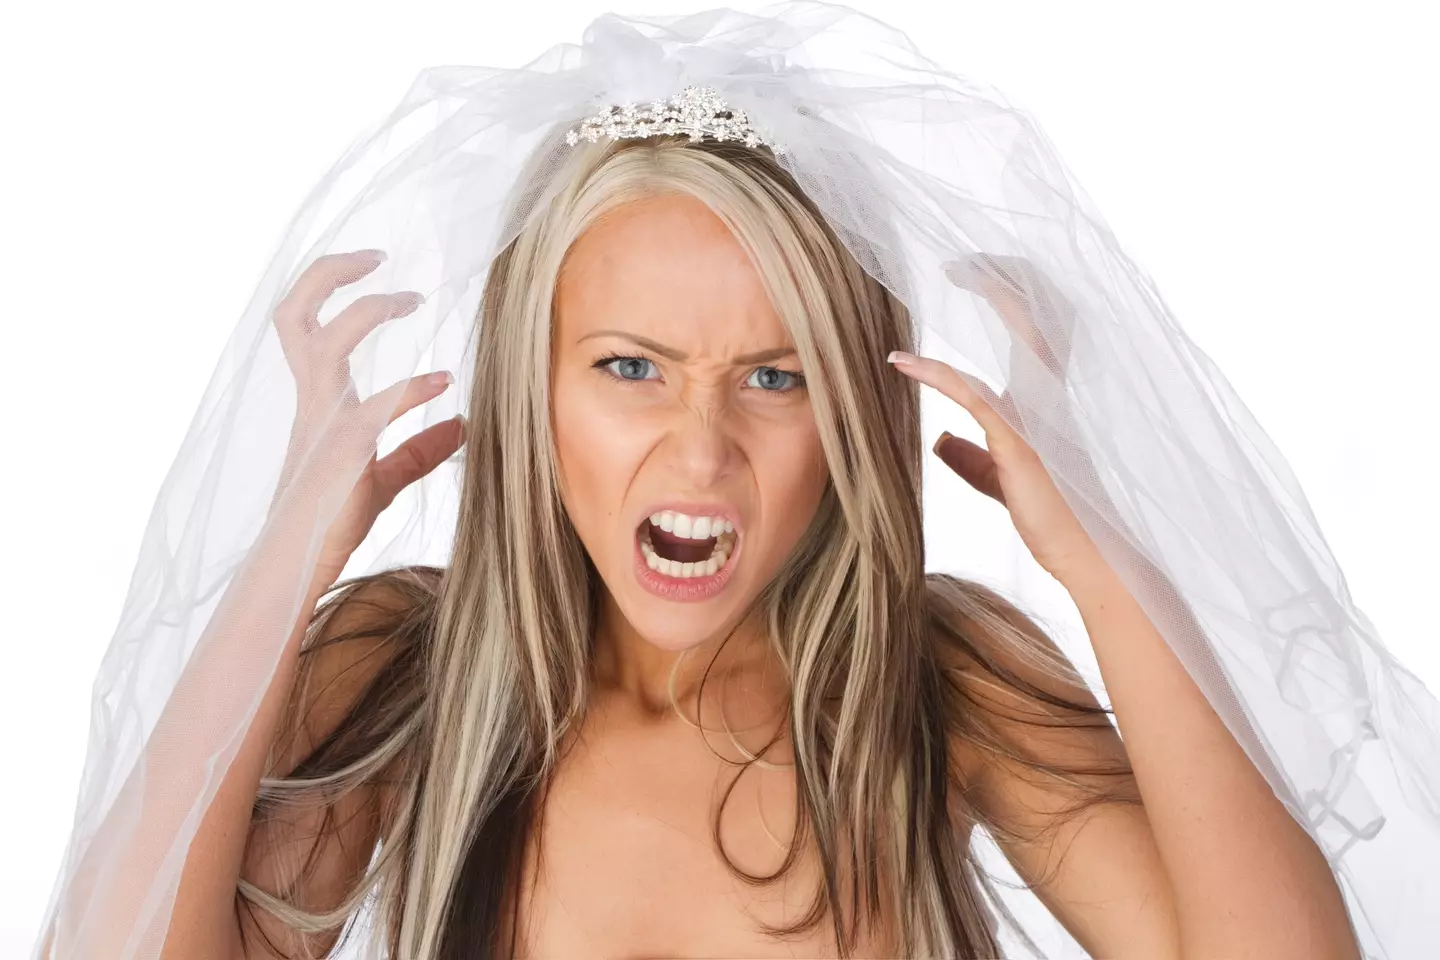 The bride took to a podcast to share her frustration.